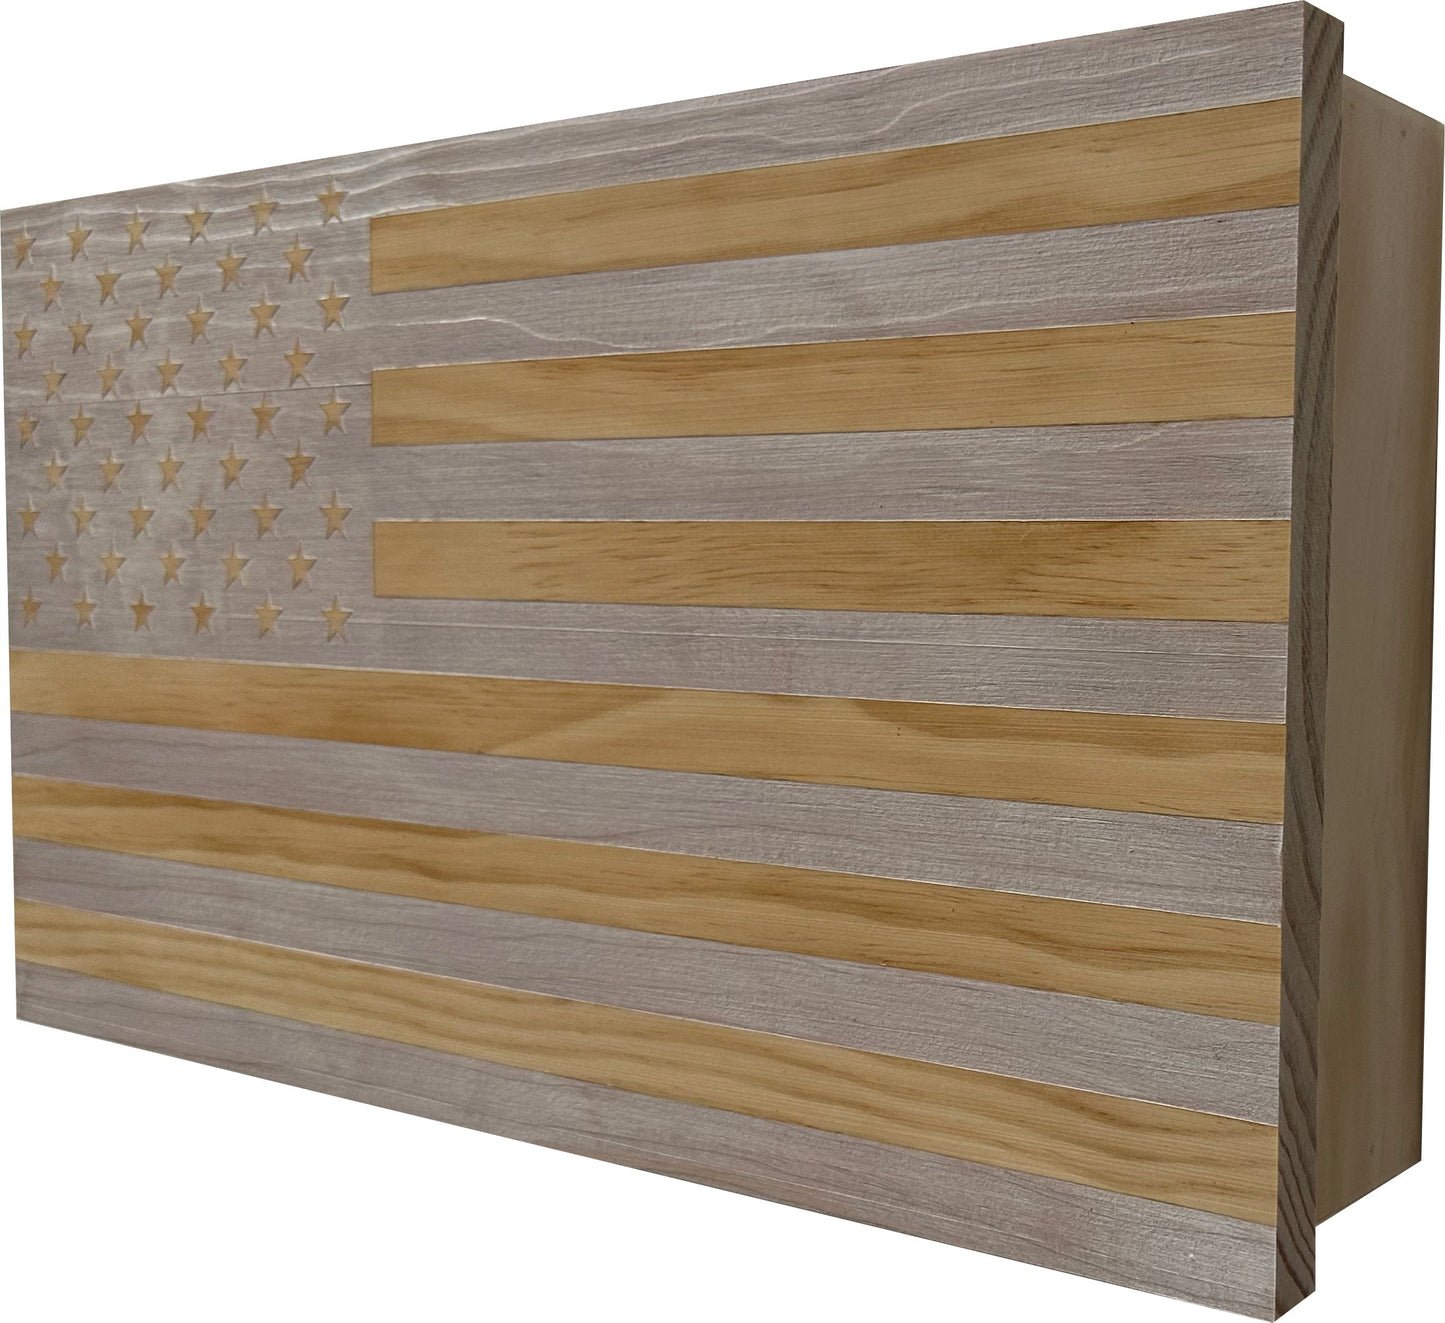 American Flag Decorative & Secure Wall-Mounted Gun Cabinet (Whitewashed)